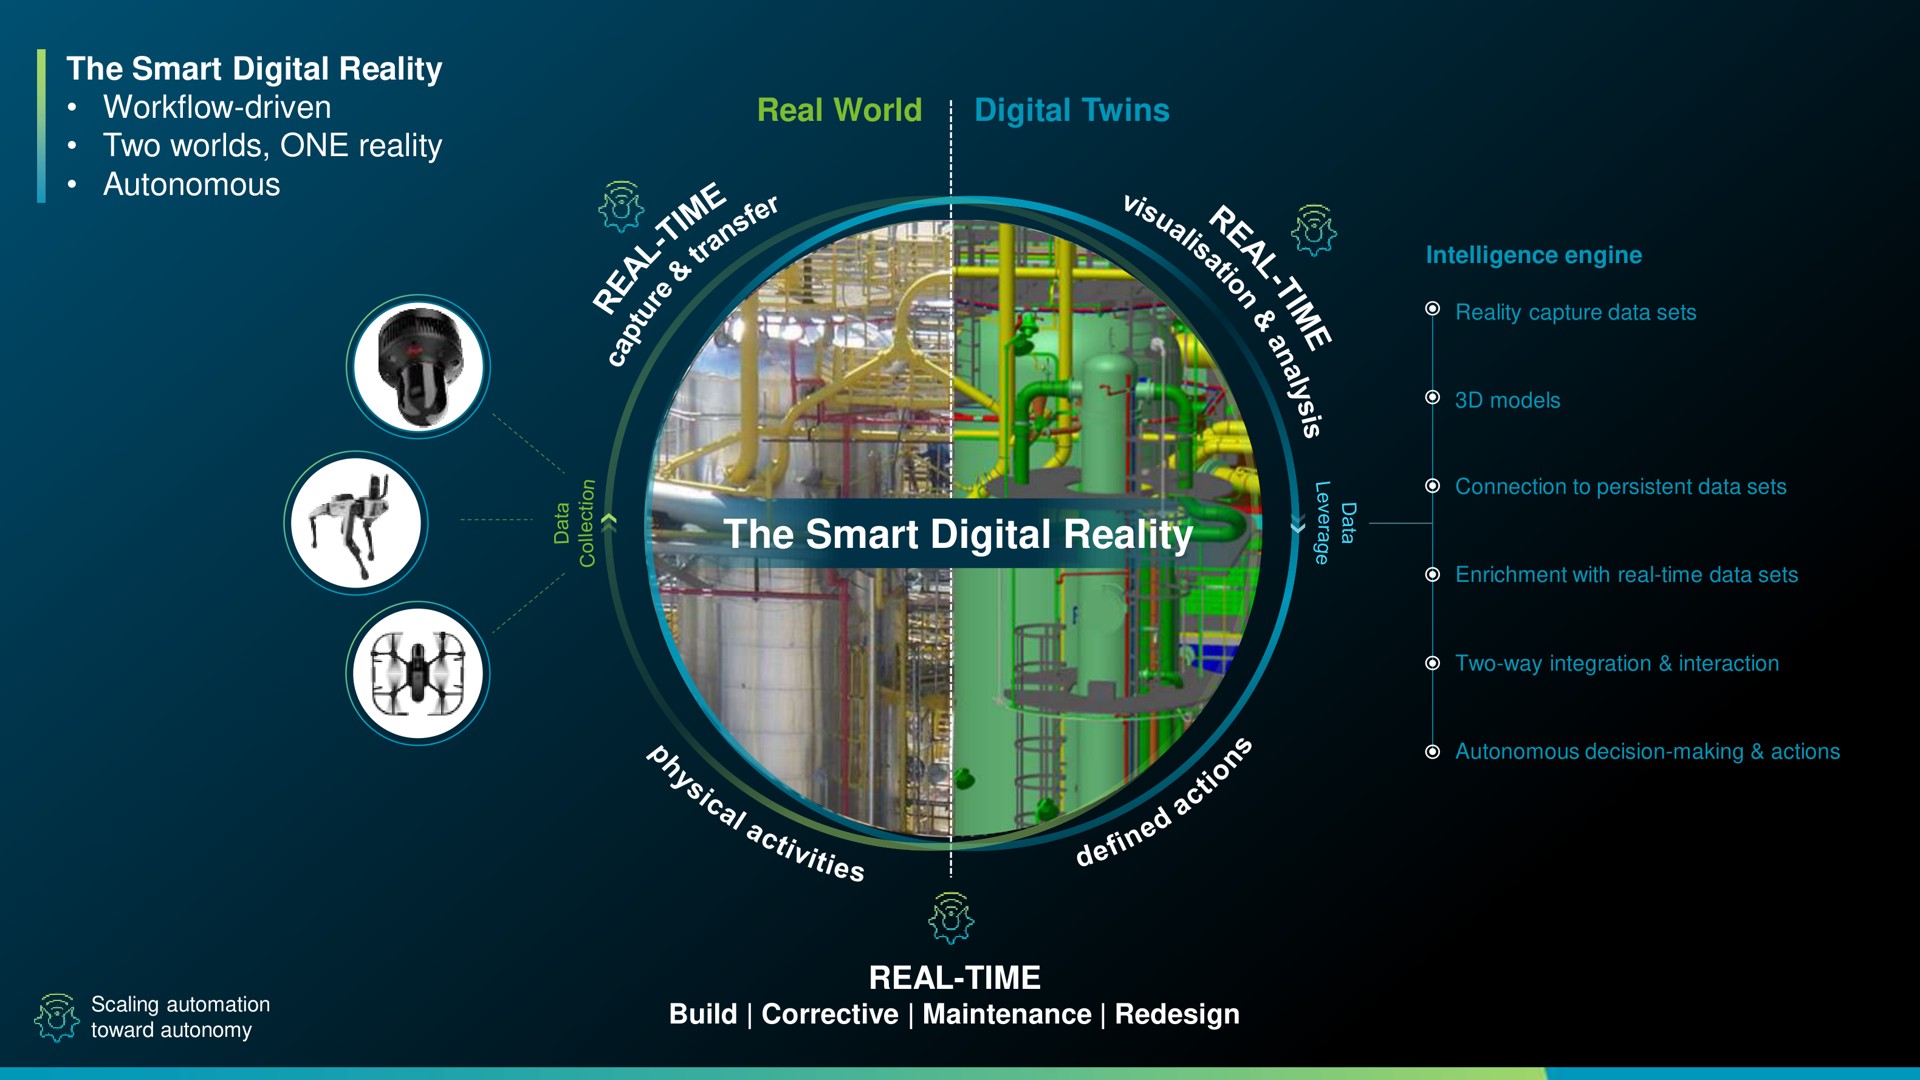 the smart digital reality driven two worlds one reality autonomous real world digital twins the smart digital reality real time steel a aly build corrective maintenance redesign | Hexagon